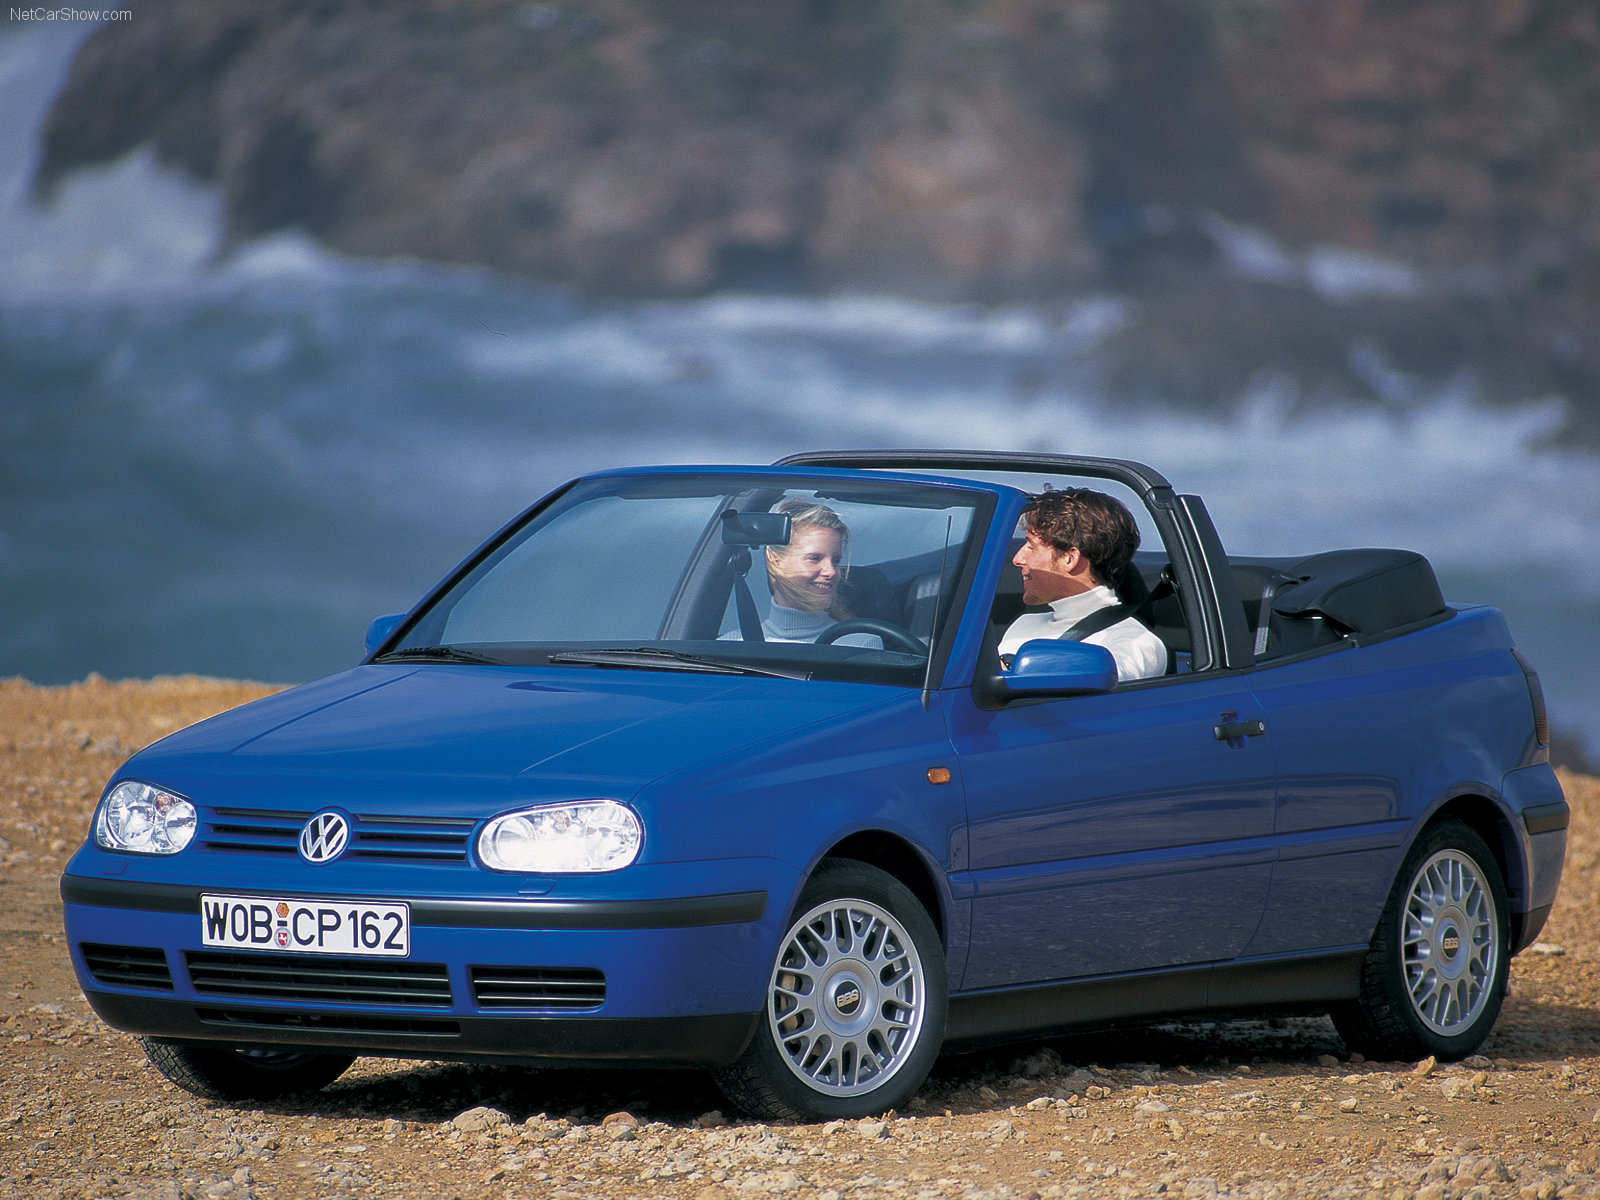 You can vote for this Volkswagen Golf Cabriolet photo